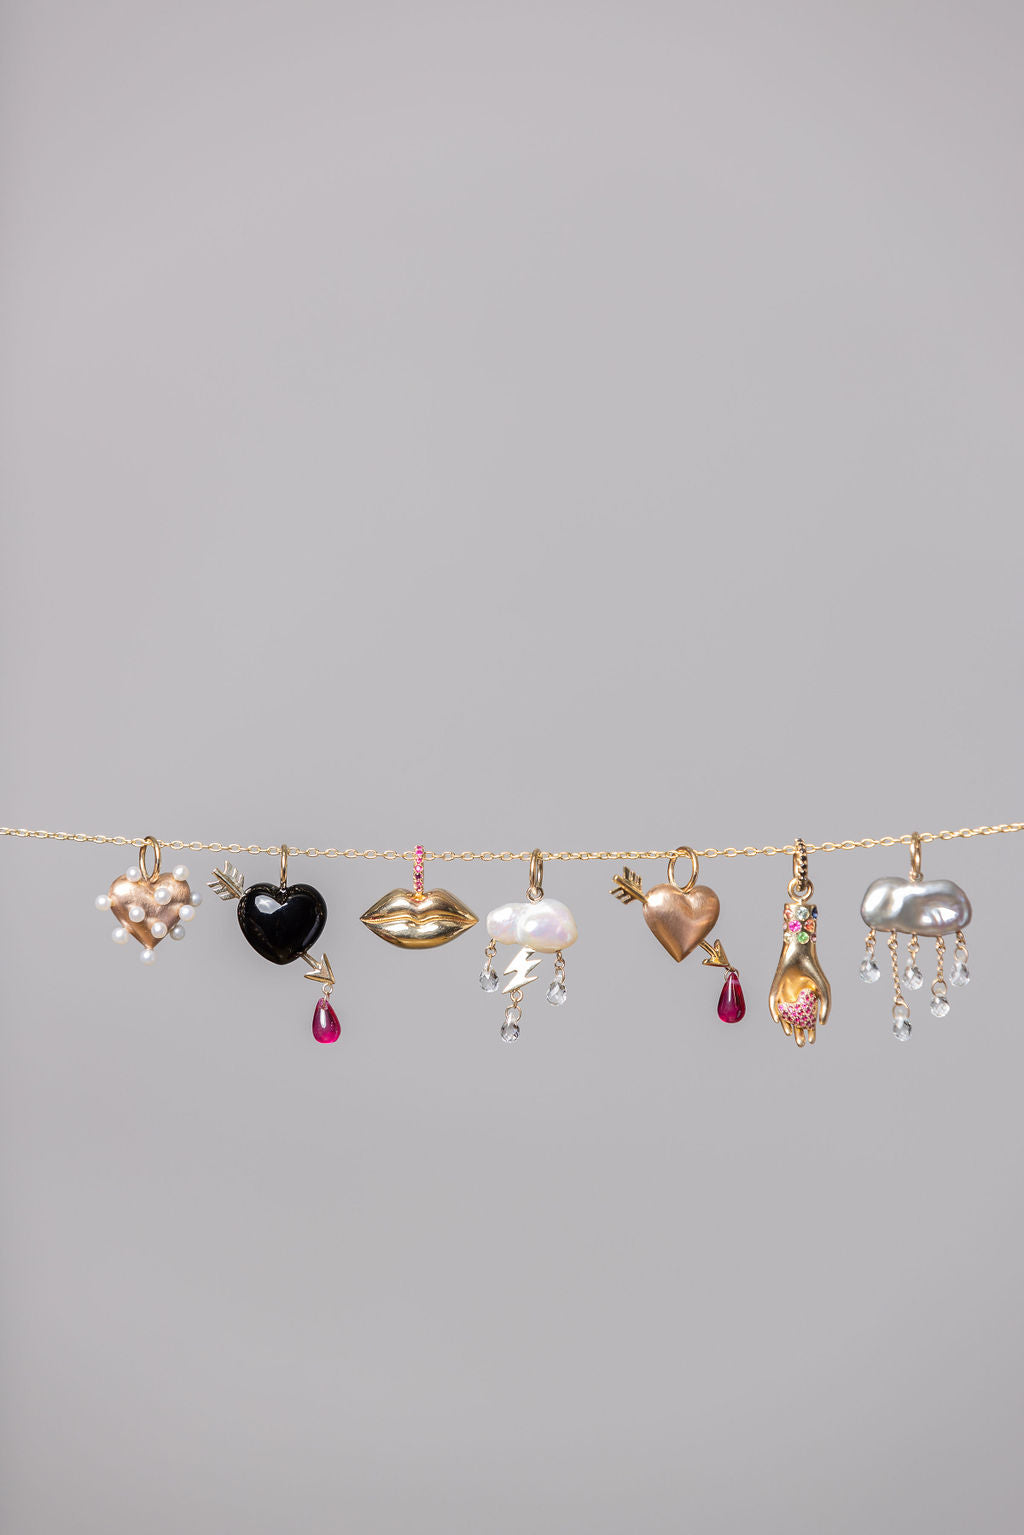 multiple different rachel quinn jewelry charms dangling from a gold chain horizontal with grey background